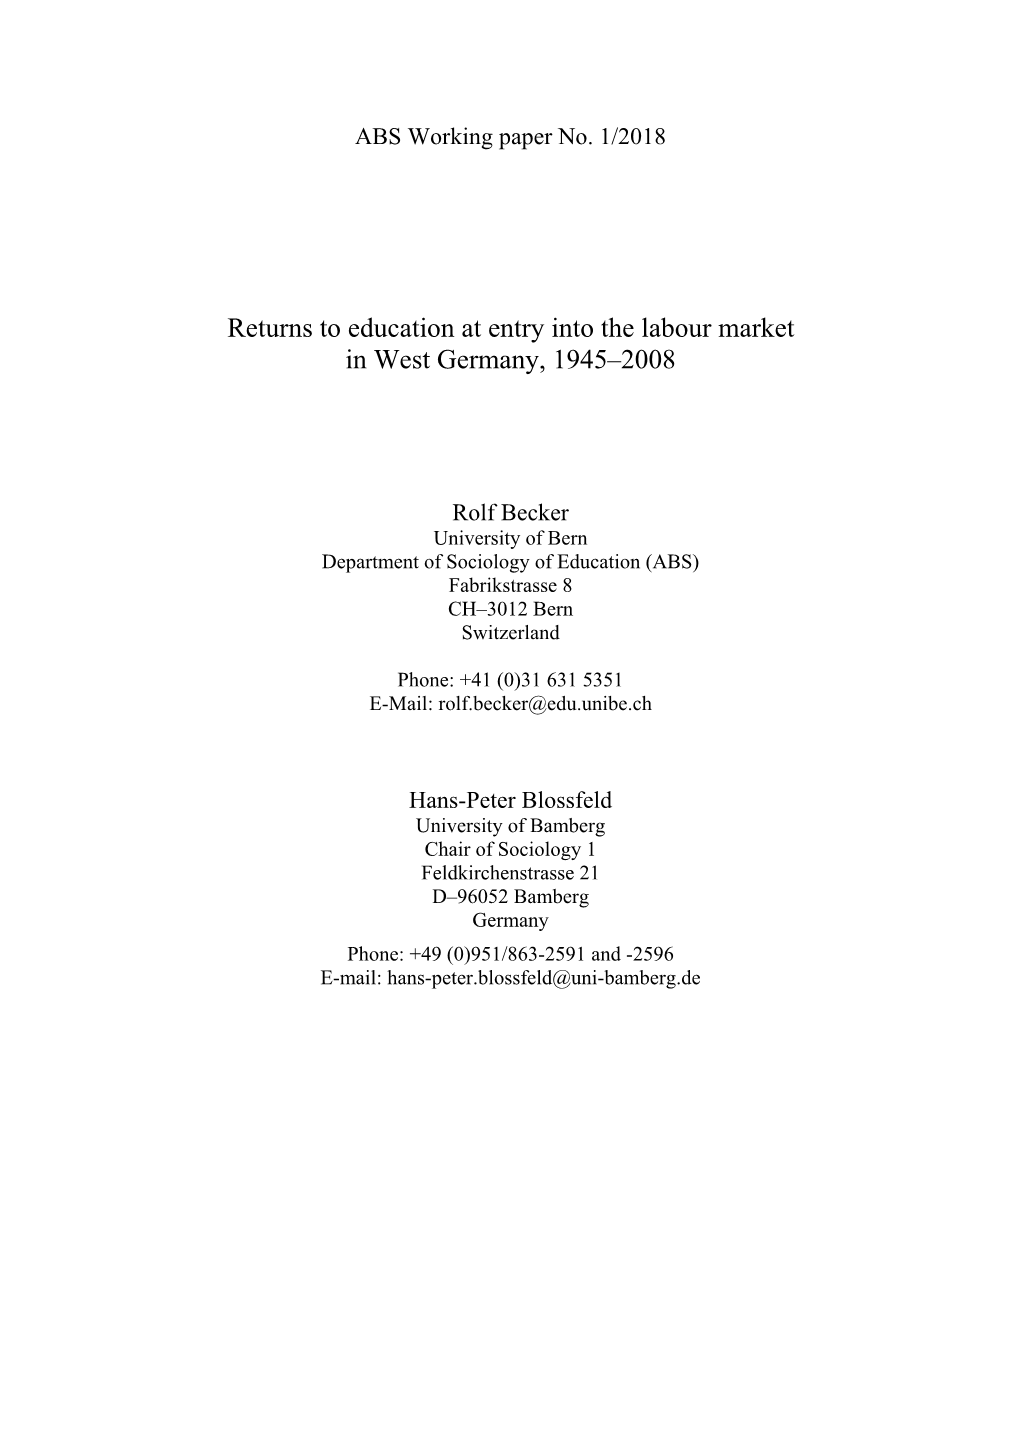 Returns to Education at Entry Into the Labour Market in West Germany, 1945–2008